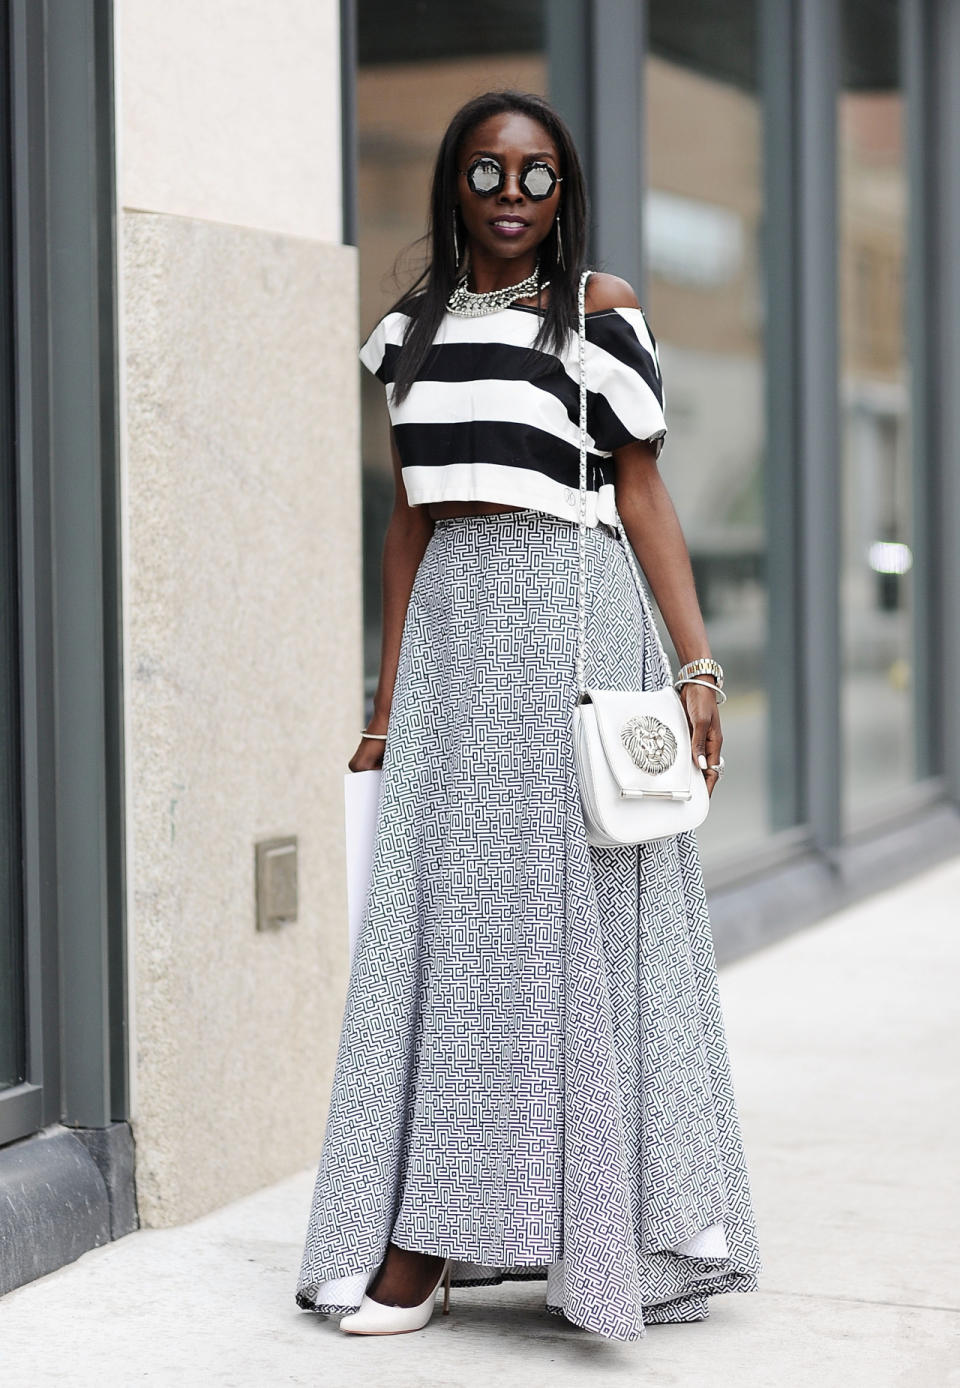 A maxi skirt and a crop top make for an ideal fashion week look.